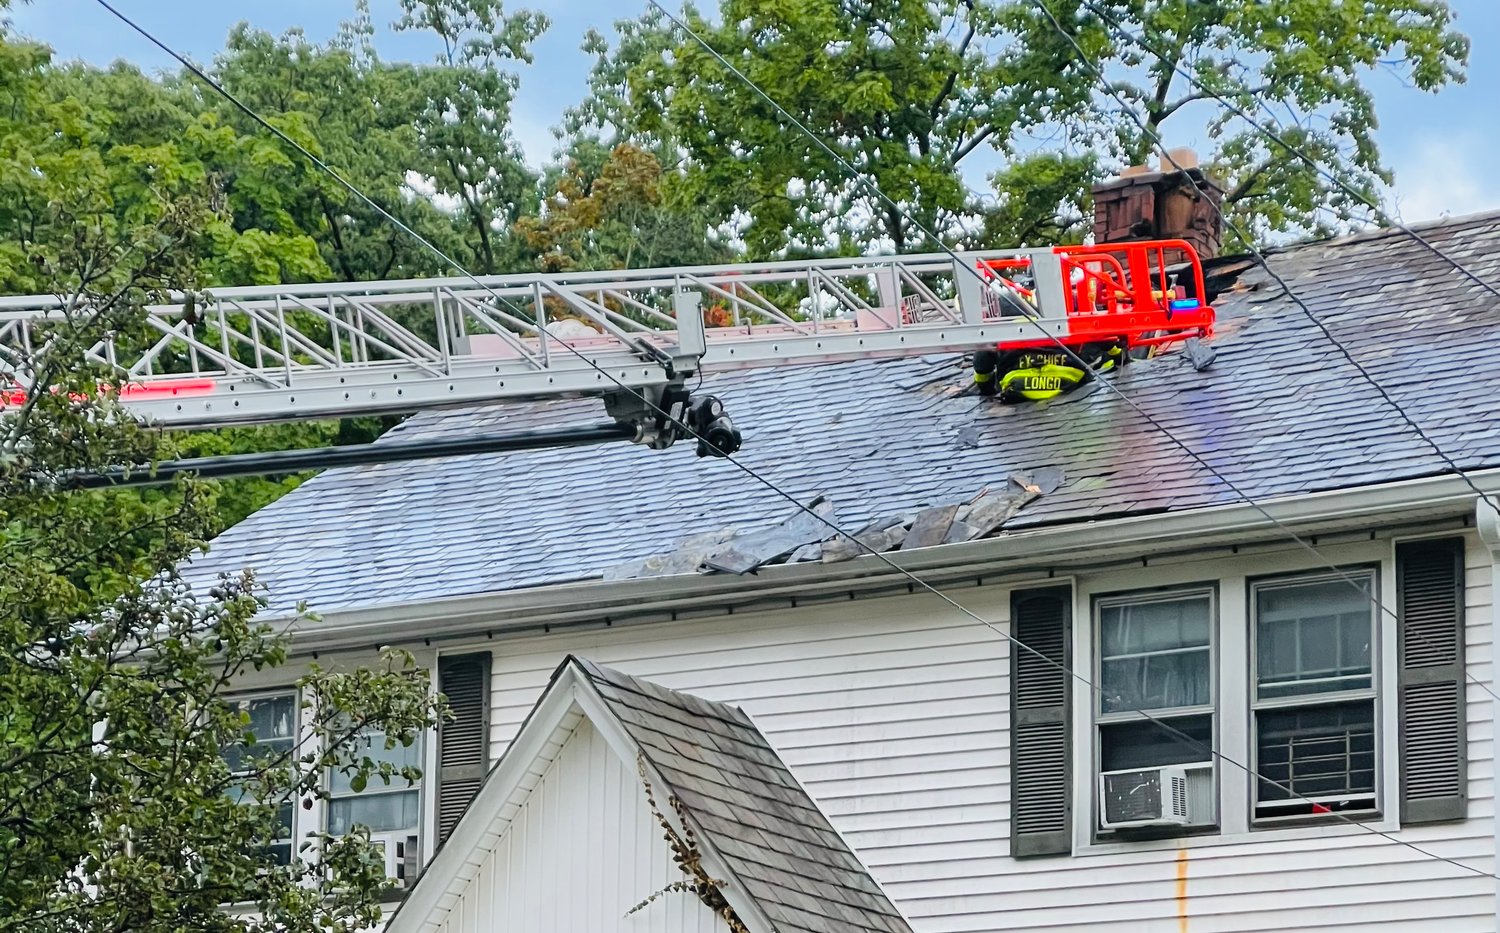 Landing Road was filled with police and firetrucks from surrounding fire departments on Tuesday to help combat the house fire.